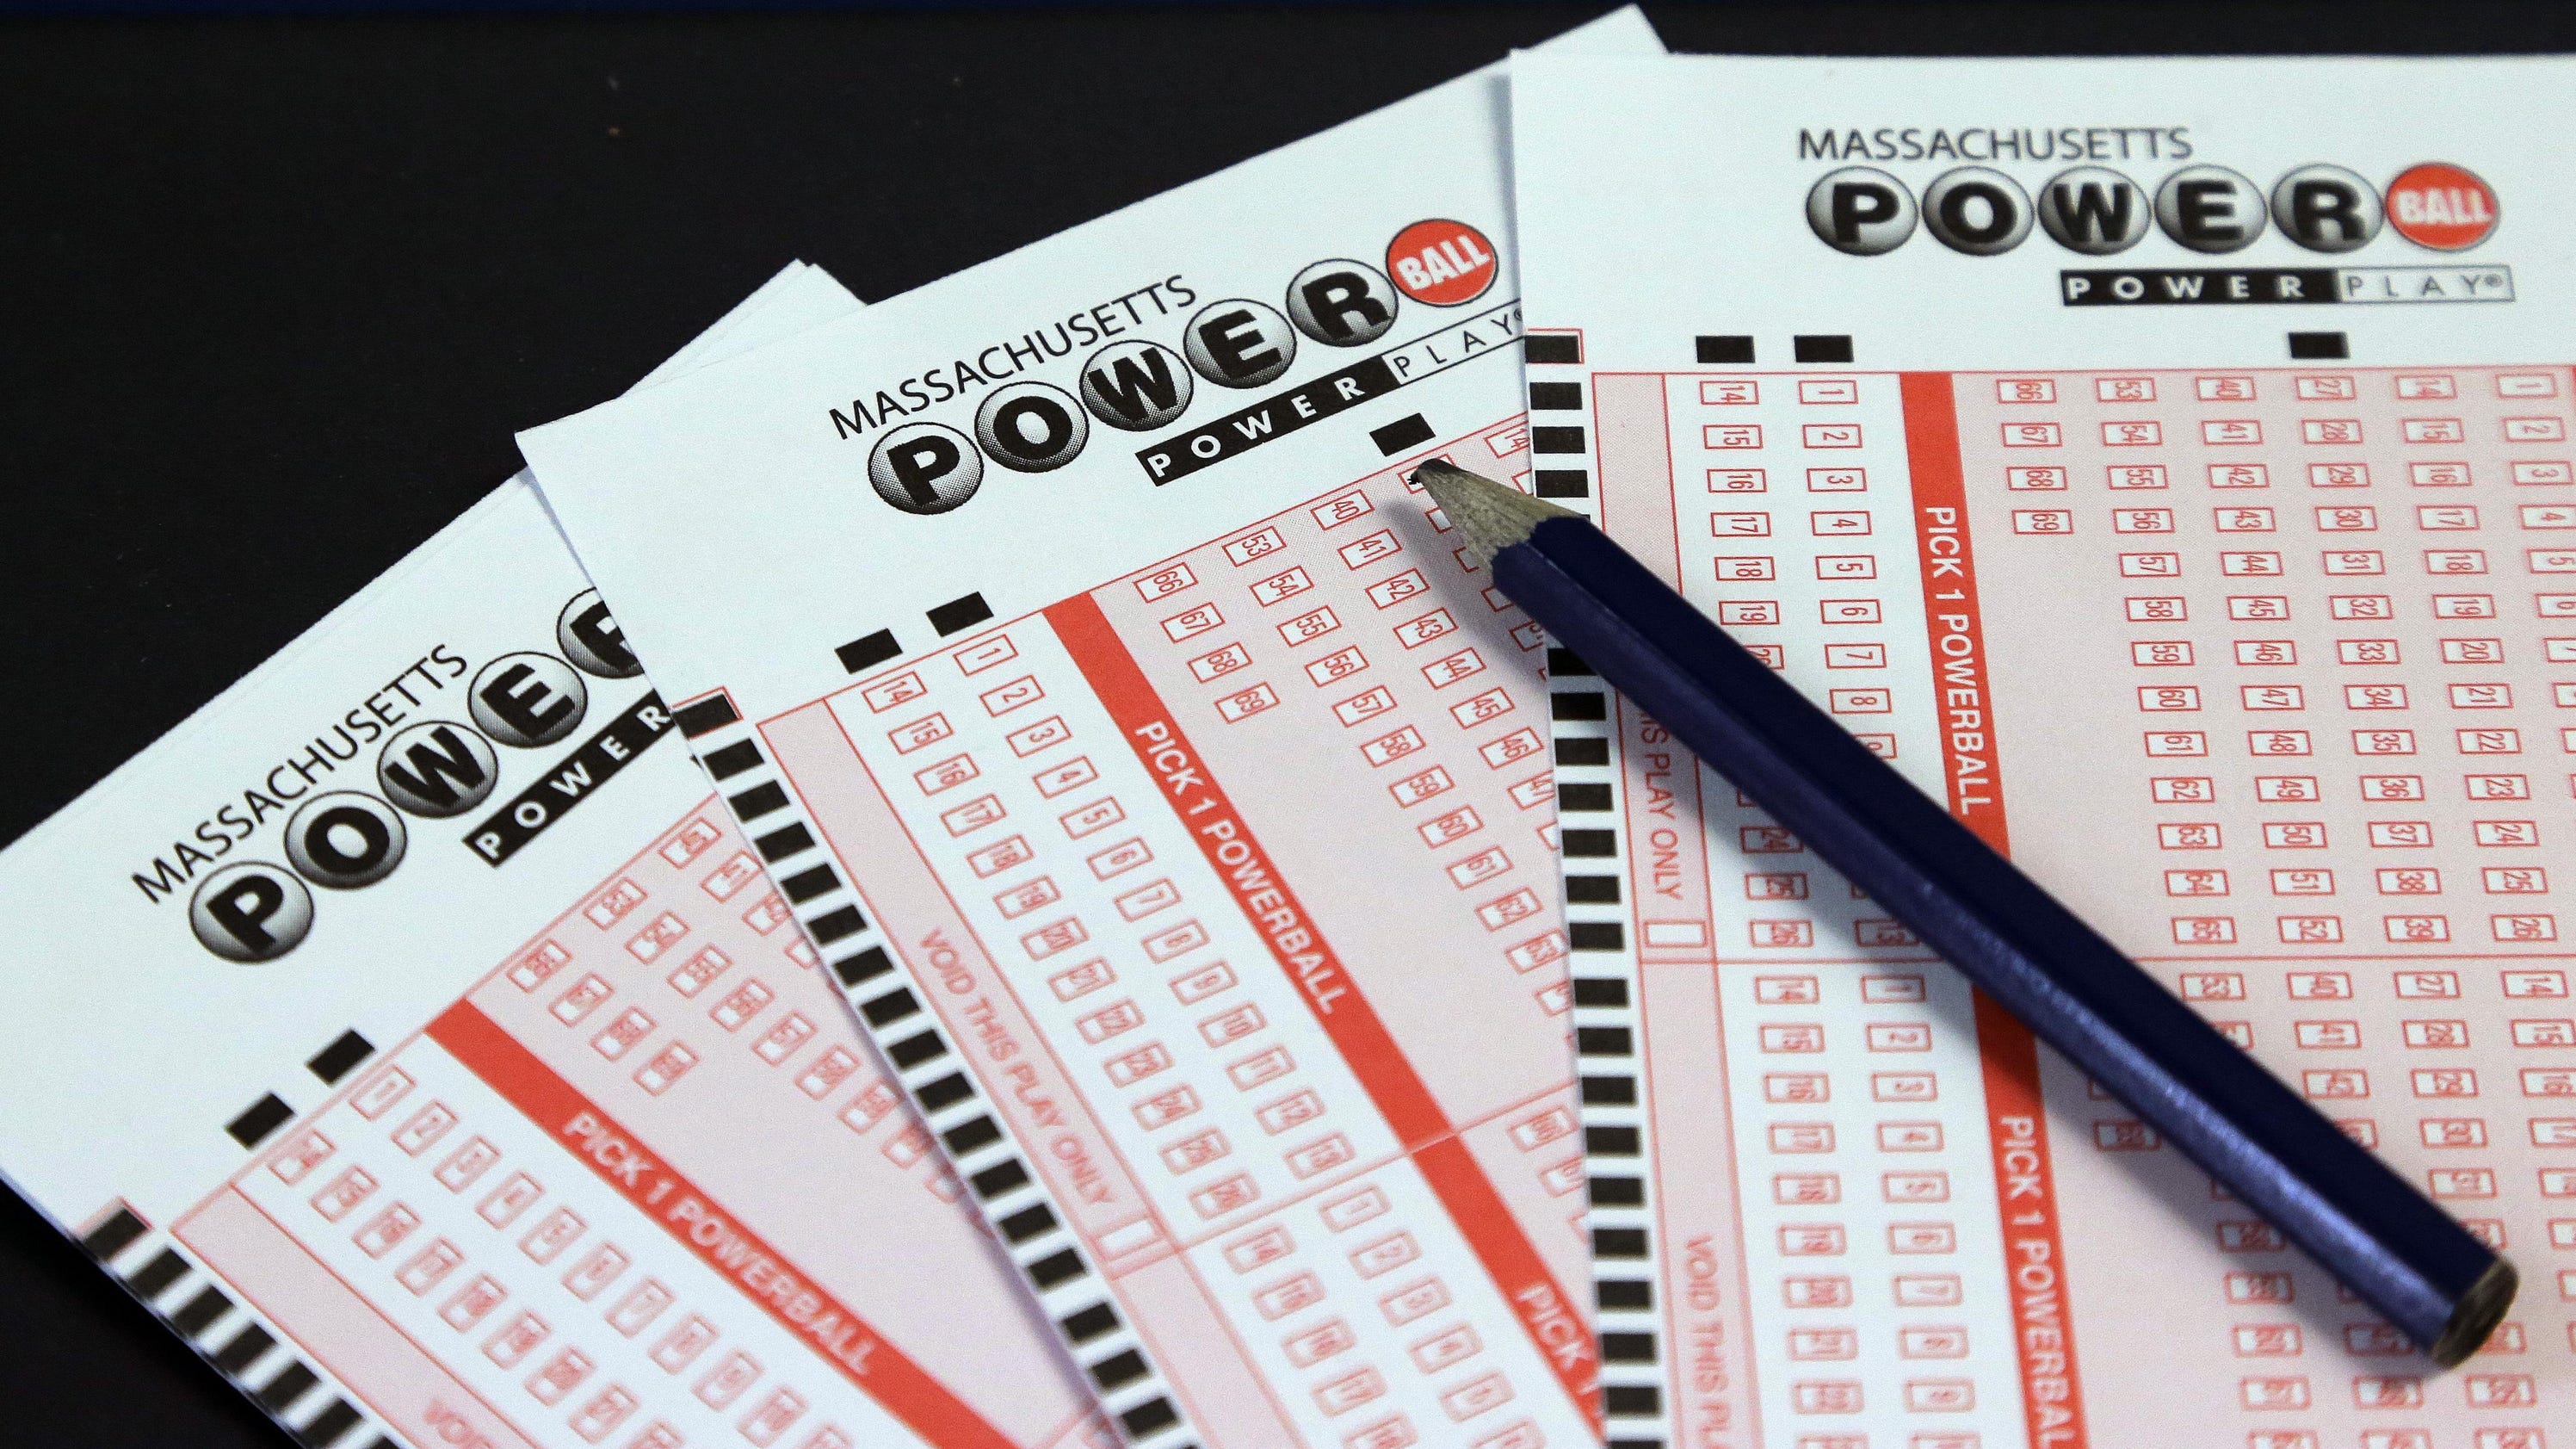 Ticket sold in New Jersey wins Powerball jackpot3200 x 1680